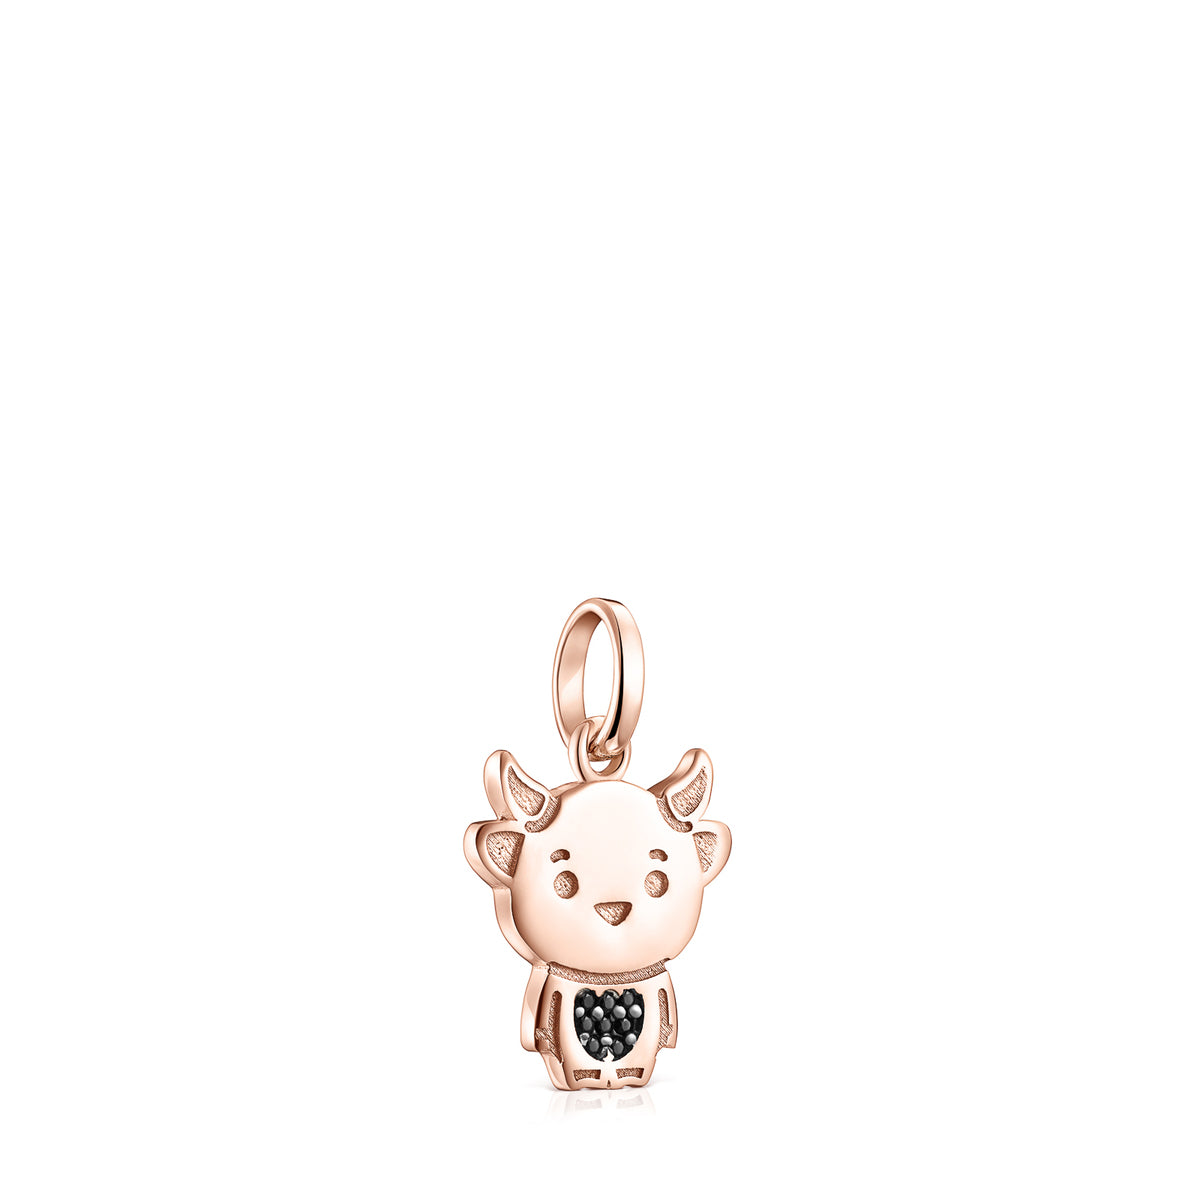 Tous Chinese Horoscope Ox Pendant in Rose Gold Vermeil with Spinel 918434510